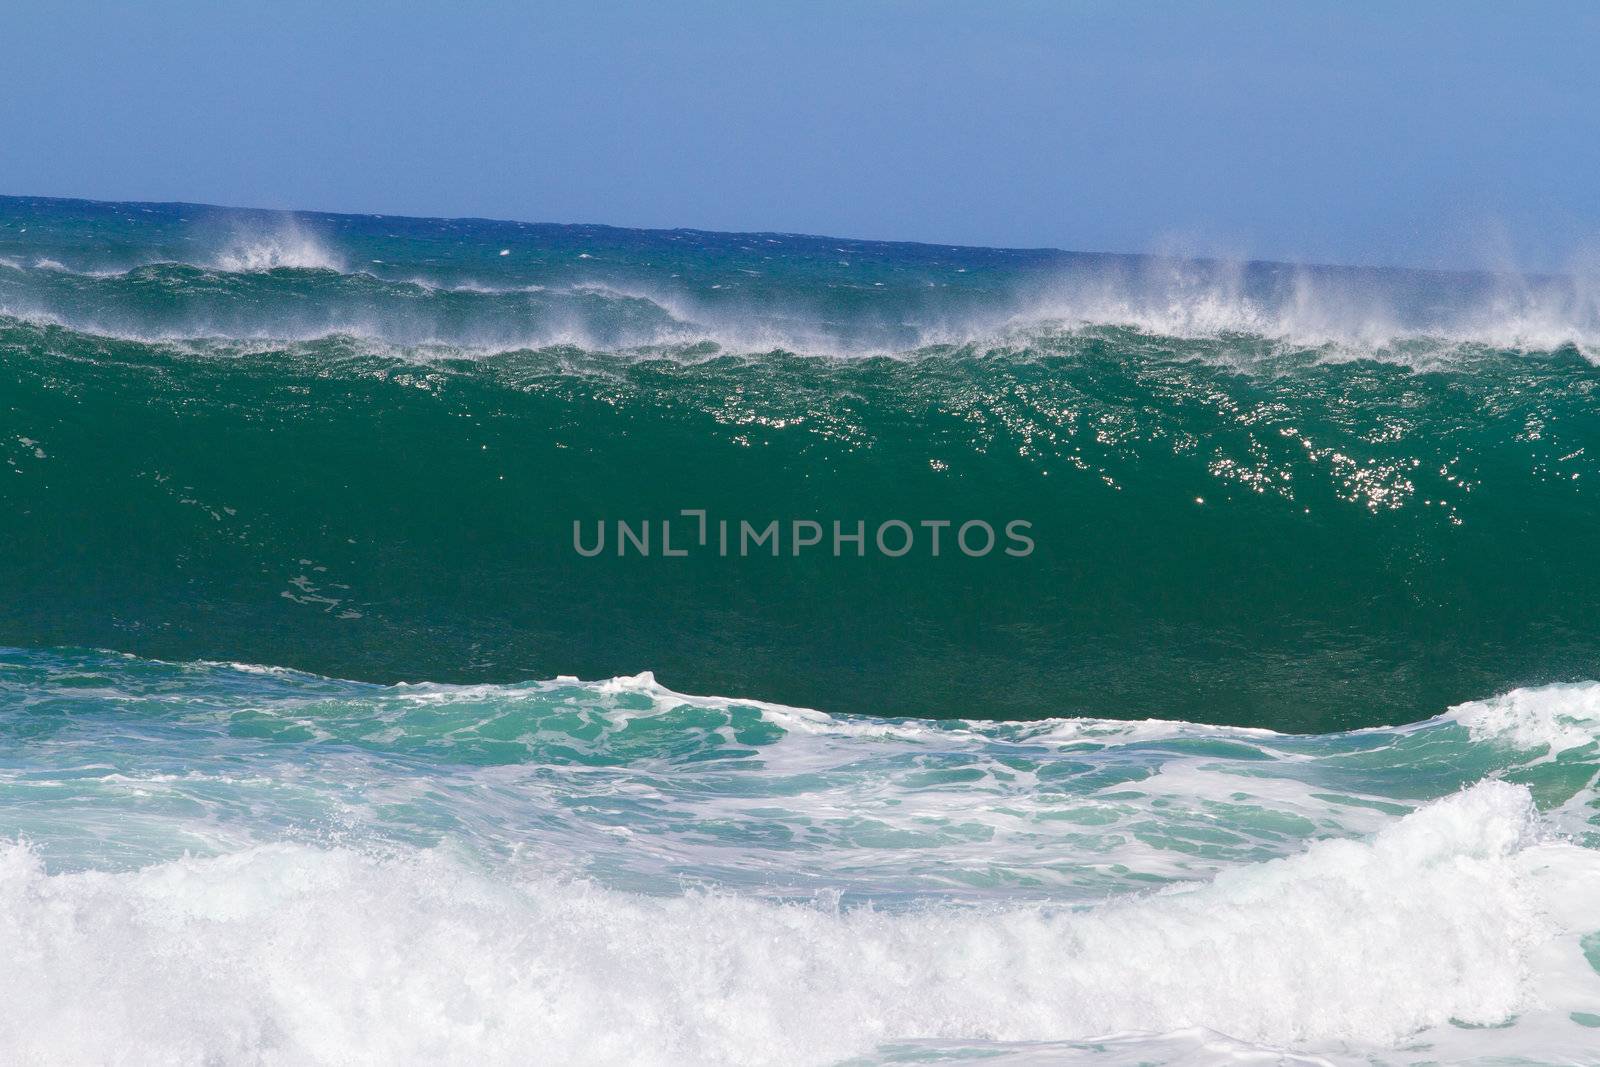 Large waves break off the north shore of oahu hawaii during a great time for surfers surfing. These waves have hollow barrells and are located at pipeline by sunset beach.